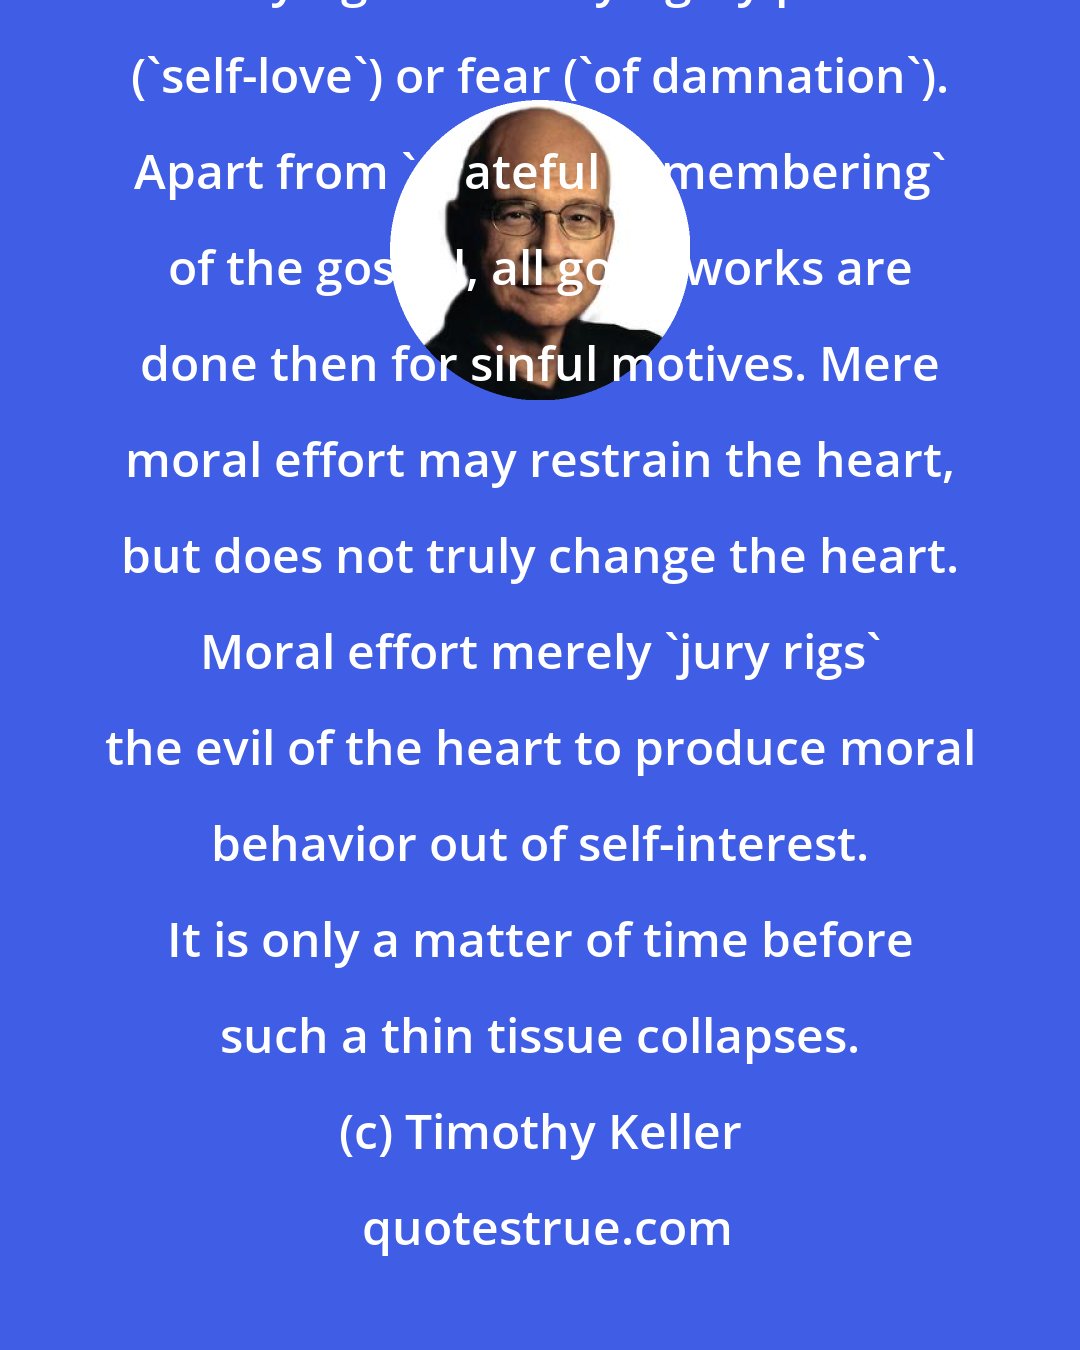 Timothy Keller: Unless we believe the gospel, we will be driven in all we do-whether obeying or disobeying-by pride ('self-love') or fear ('of damnation'). Apart from 'grateful remembering' of the gospel, all good works are done then for sinful motives. Mere moral effort may restrain the heart, but does not truly change the heart. Moral effort merely 'jury rigs' the evil of the heart to produce moral behavior out of self-interest. It is only a matter of time before such a thin tissue collapses.